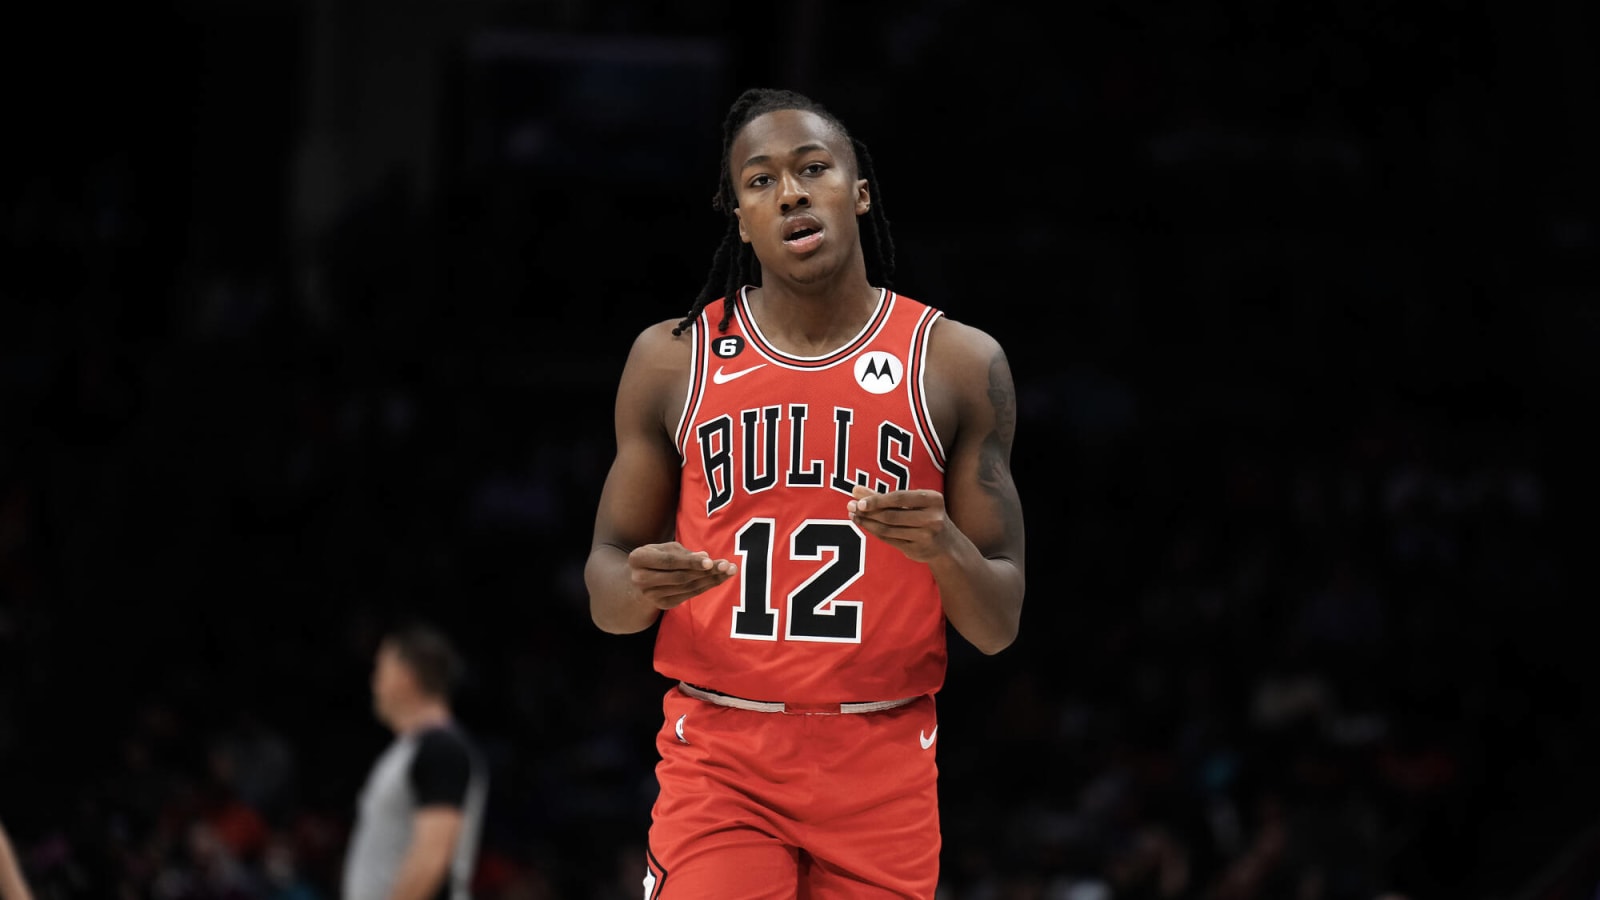 Report: Ayo Dosunmu Agrees to New 3-Year Contract with the Bulls